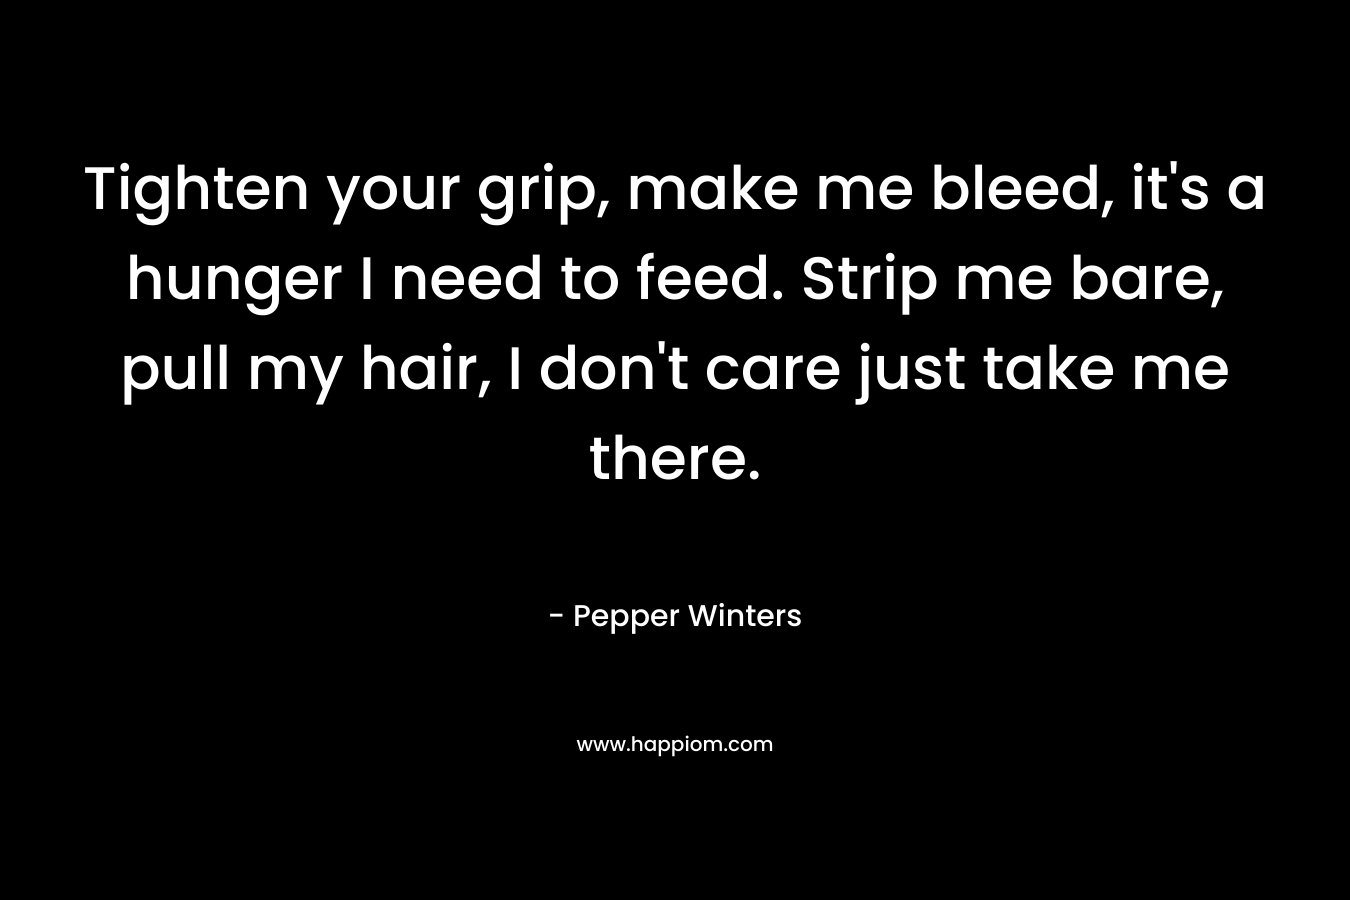 Tighten your grip, make me bleed, it's a hunger I need to feed. Strip me bare, pull my hair, I don't care just take me there.